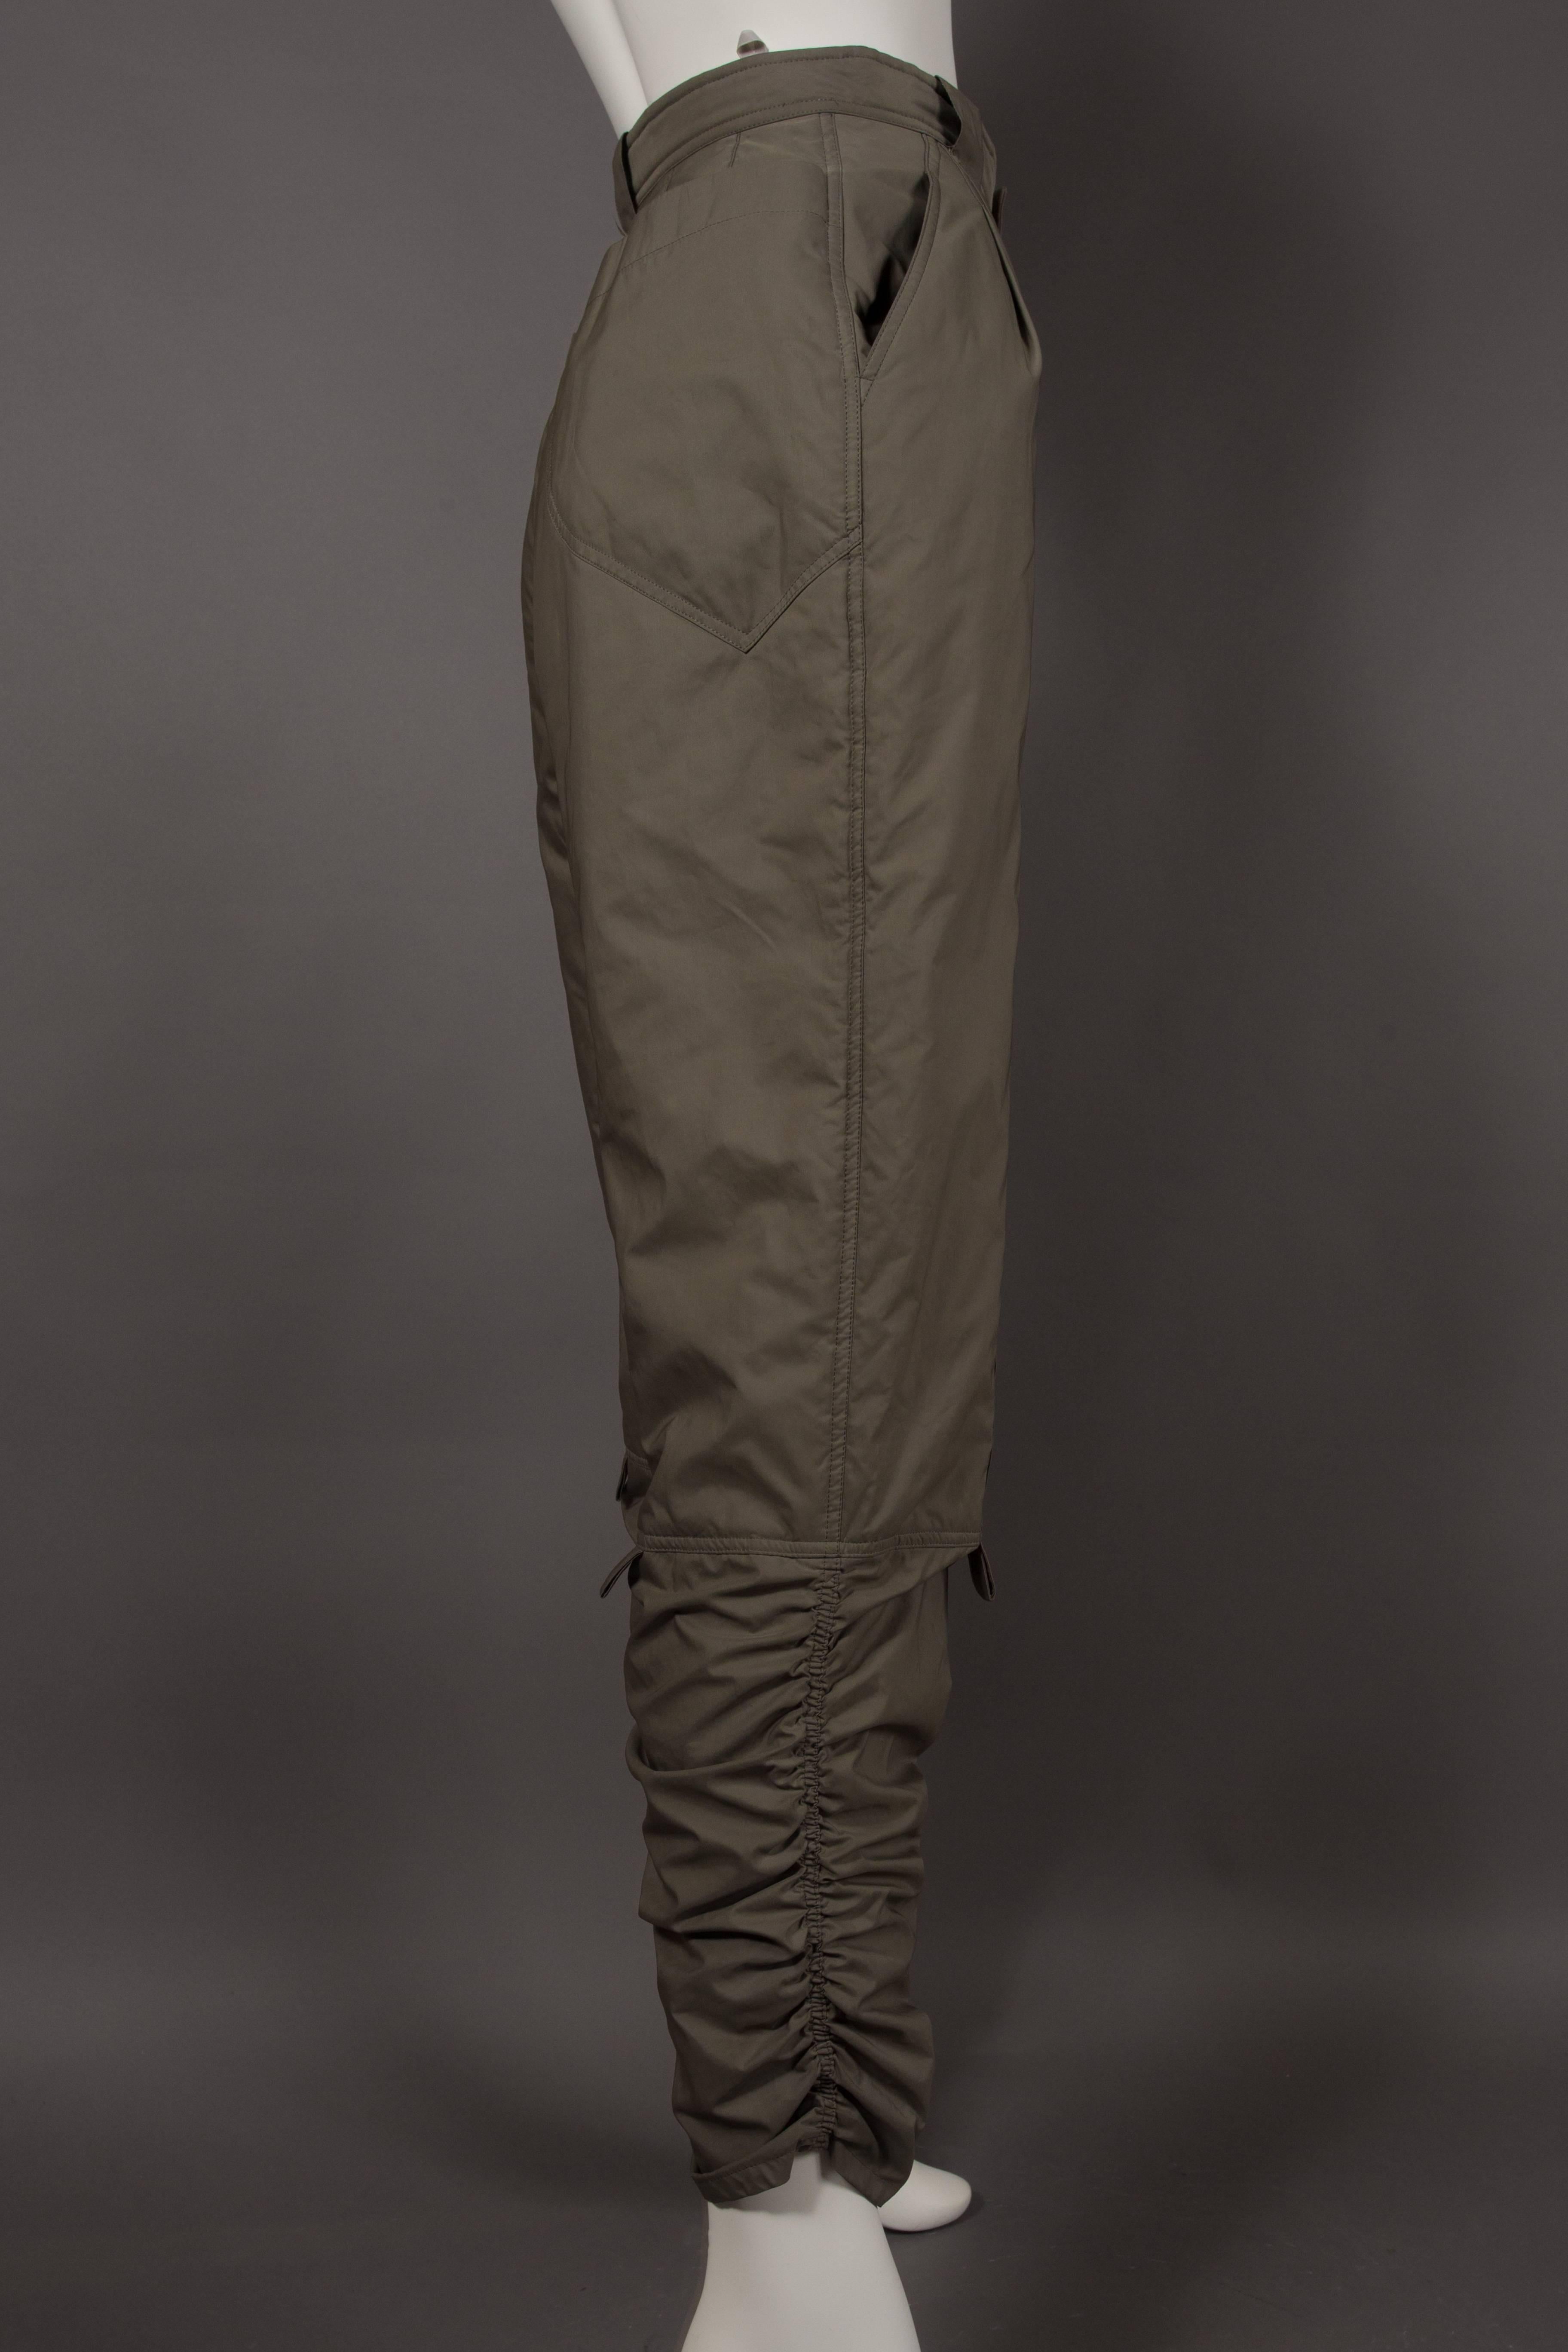 Women's Issey Miyake olive green ruched sports pants, circa 1983